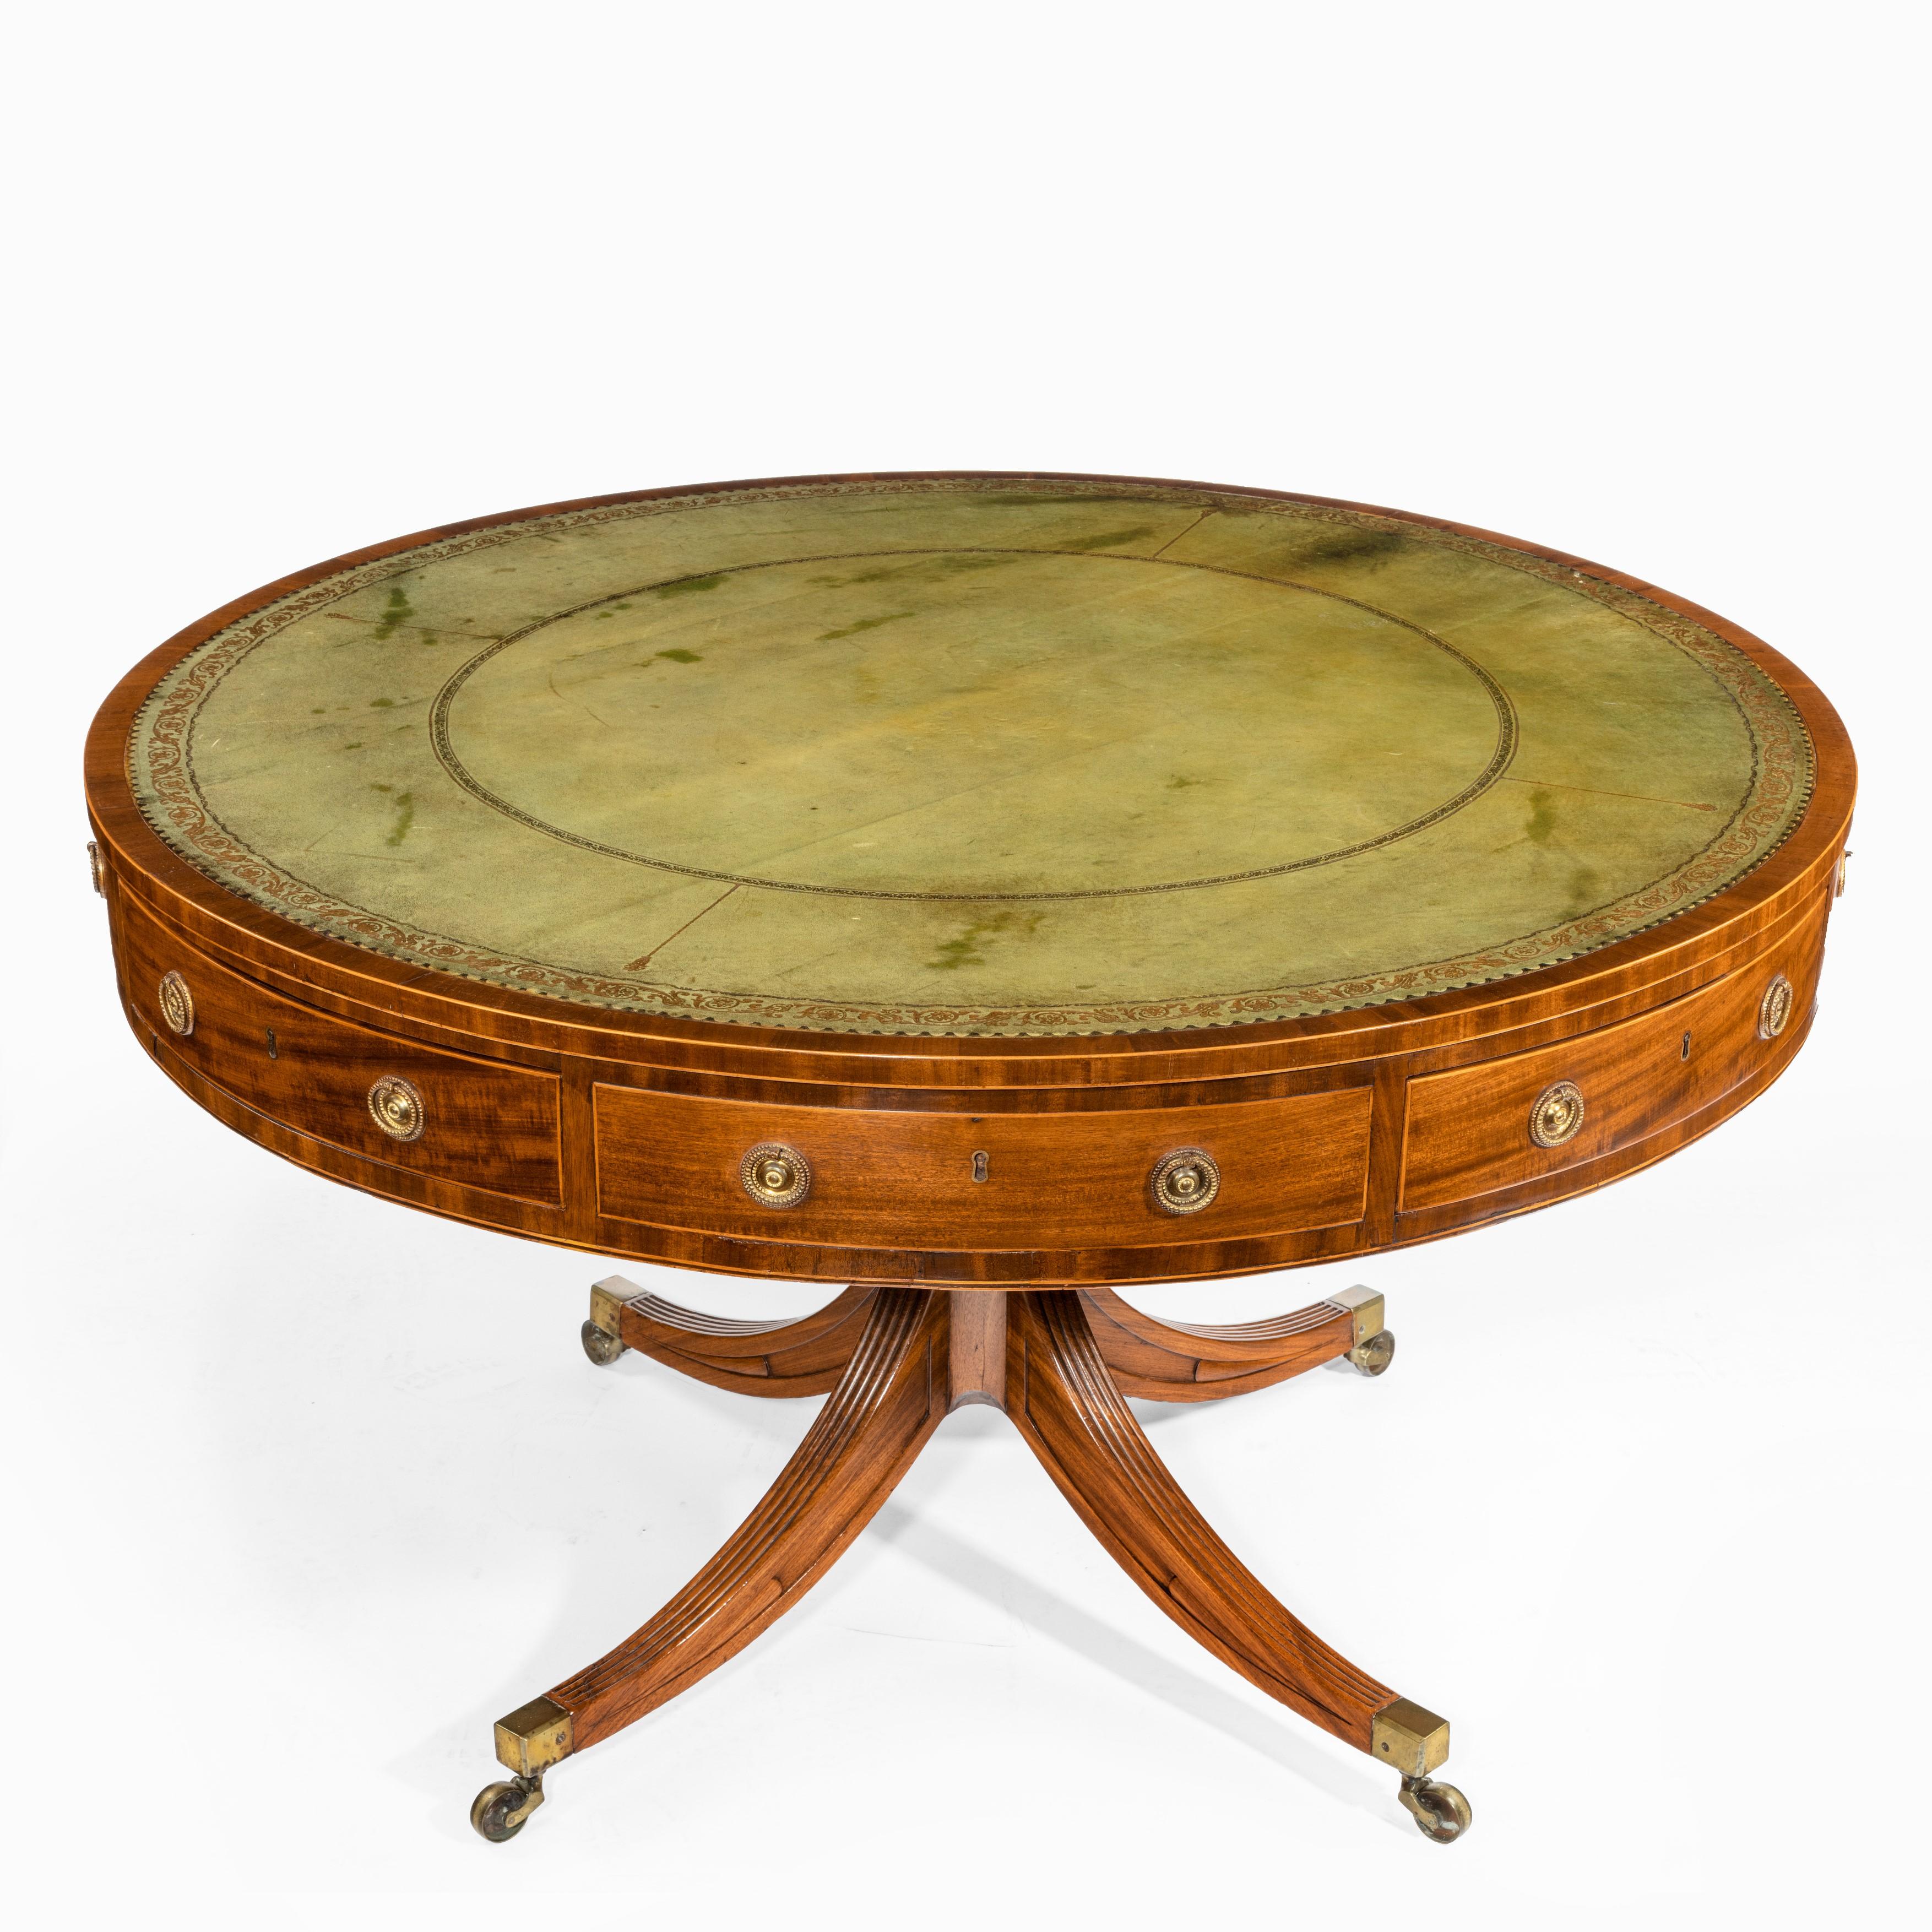 Late George III Revolving Mahogany Drum Table Attributed to Gillows For Sale 6